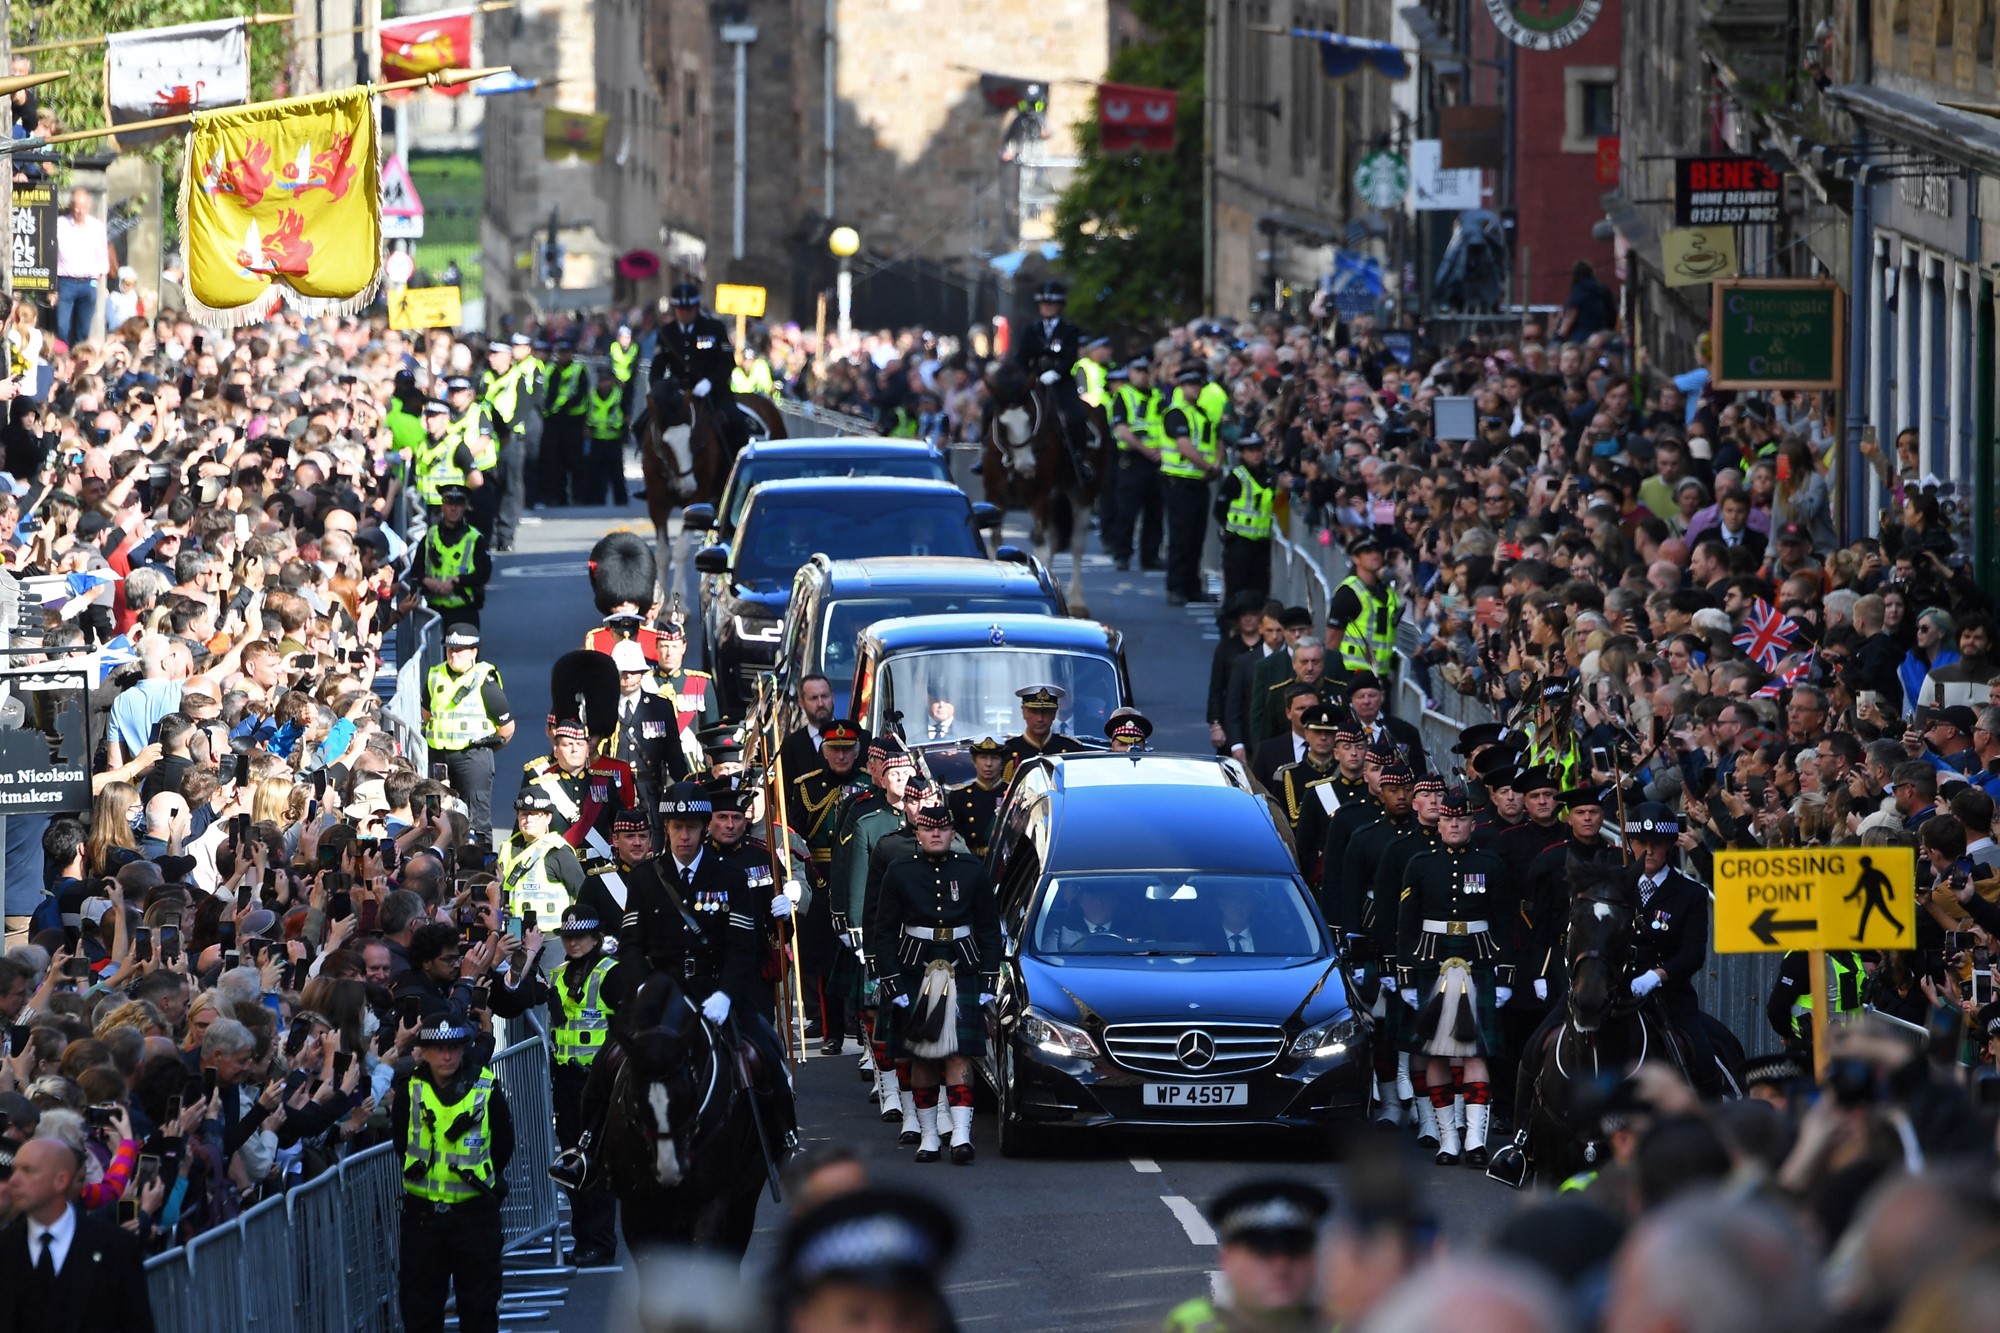 Members of the public gather to watch the procession of Queen Elizabeth II's coffin, from the Palace of Holyroodhouse to St Giles Cathedral, on the Royal Mile on September 12, 2022